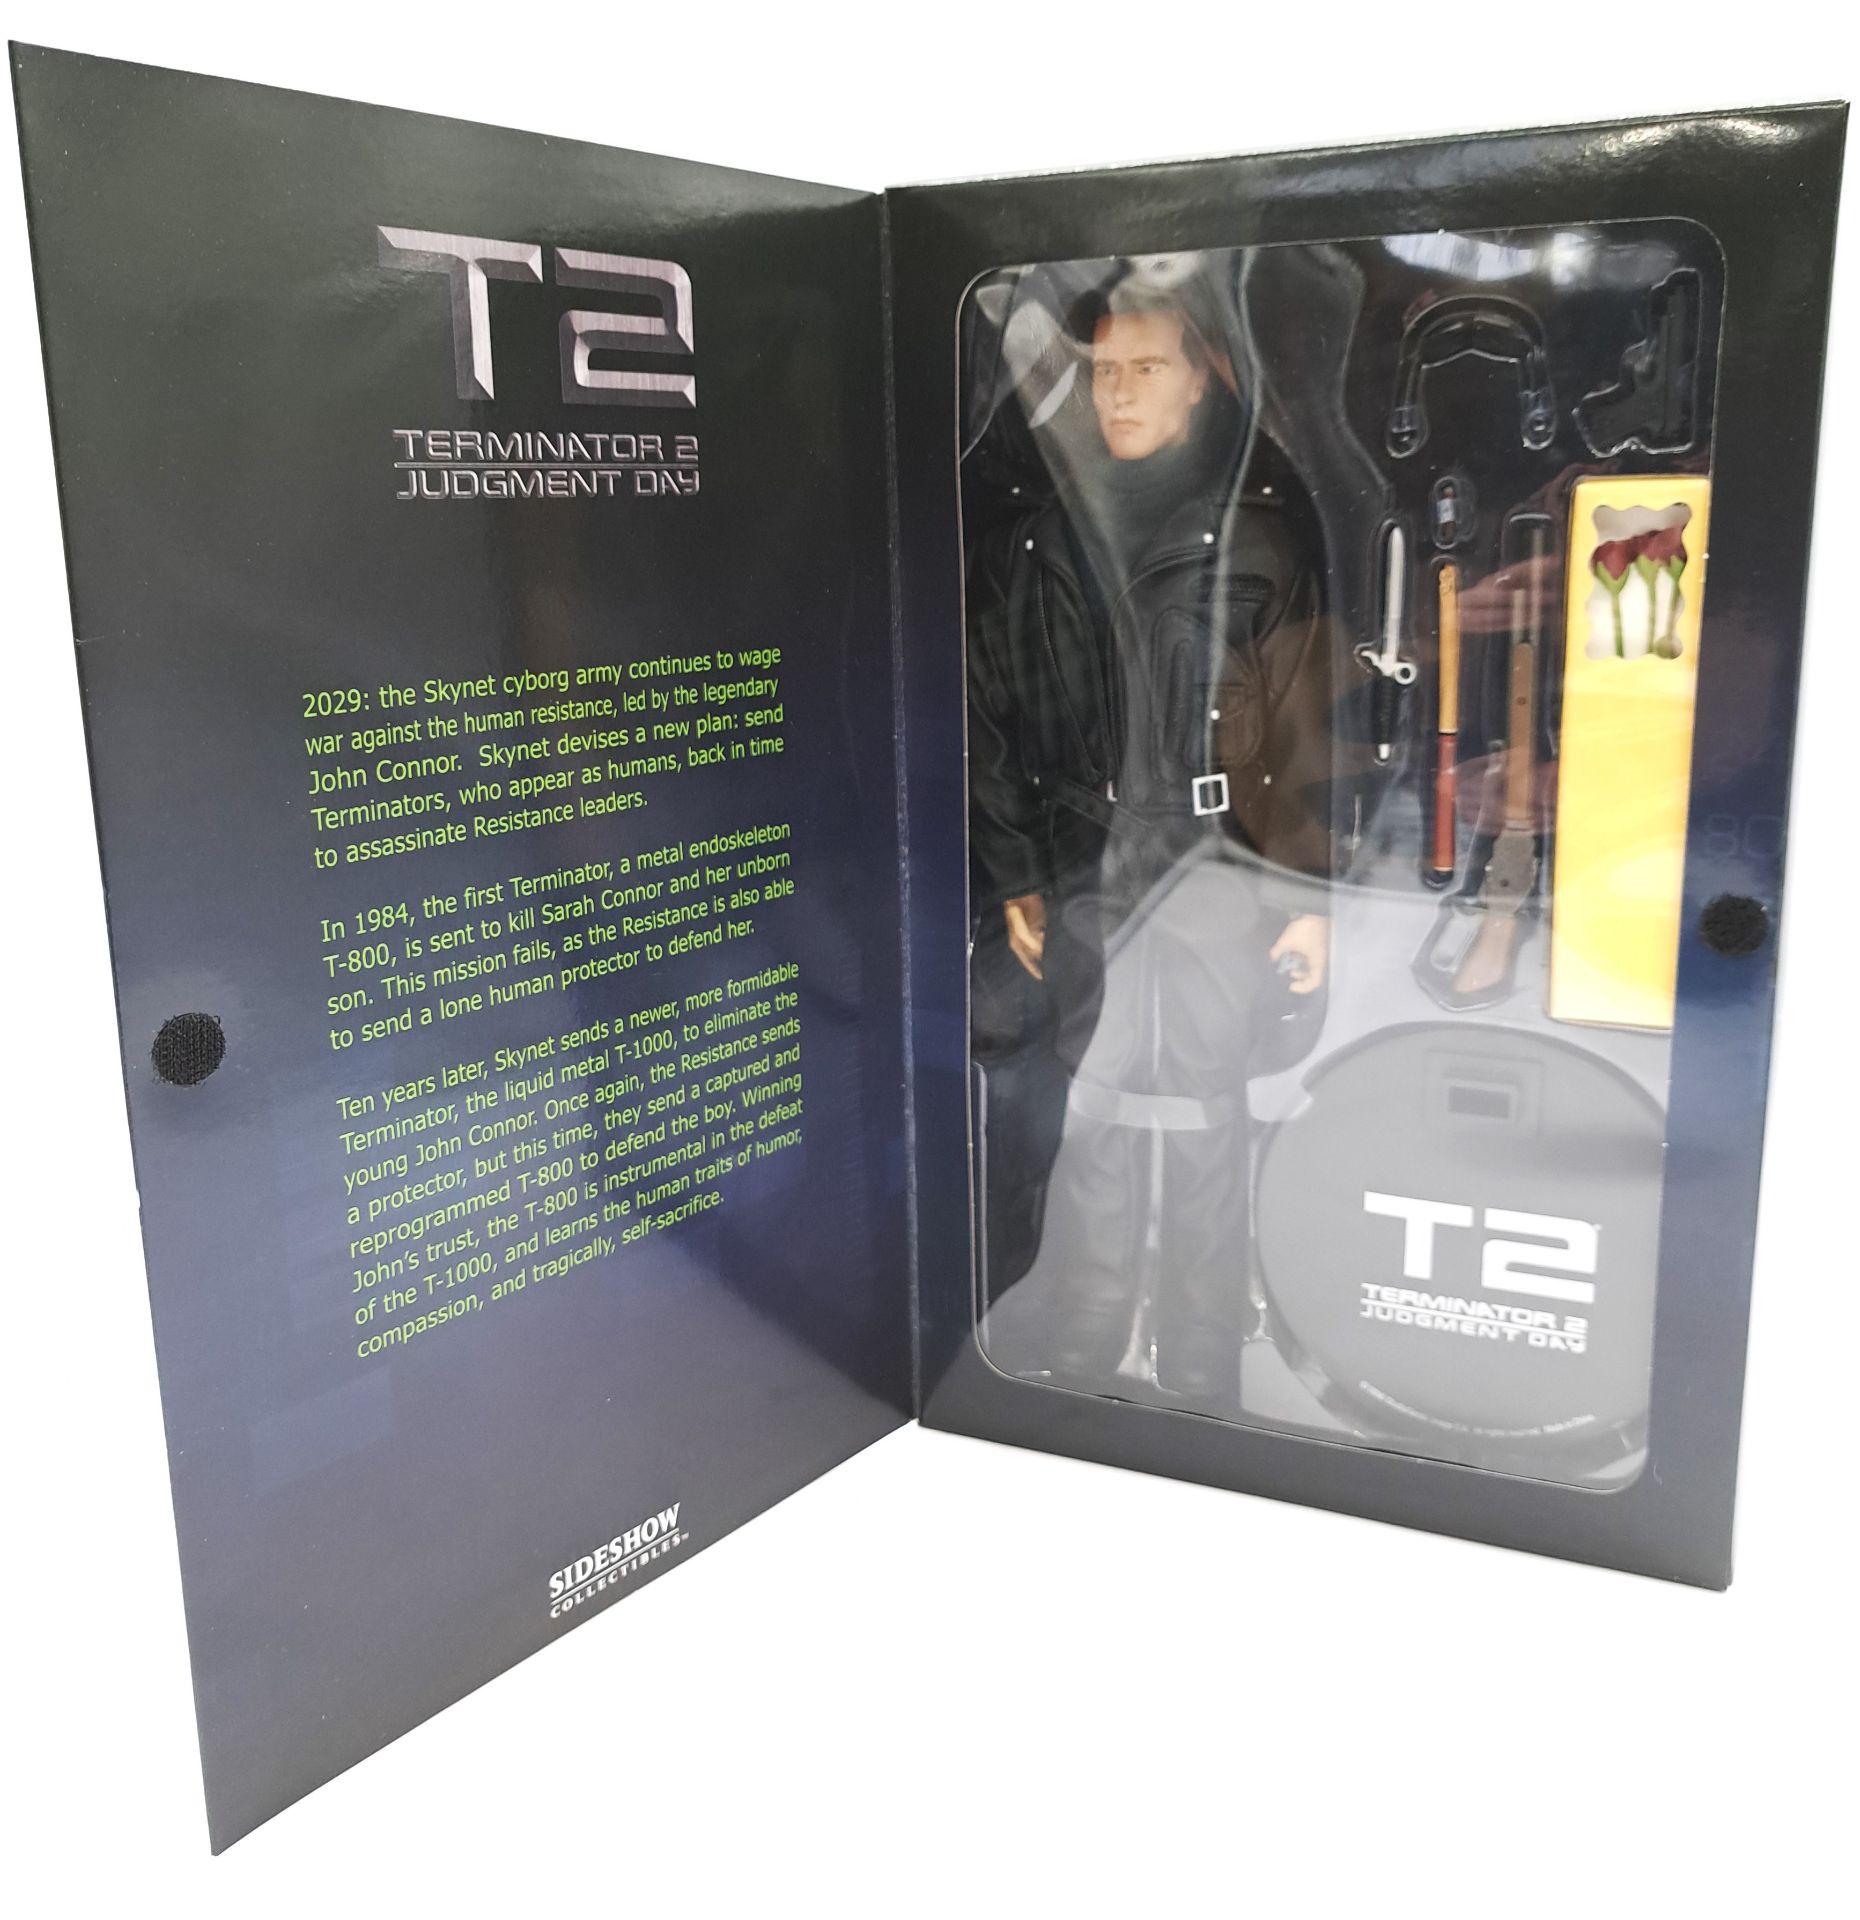 Sideshow Collectibles Terminator 2 Judgement Day T-800 1:6 Scale Collectible Figure